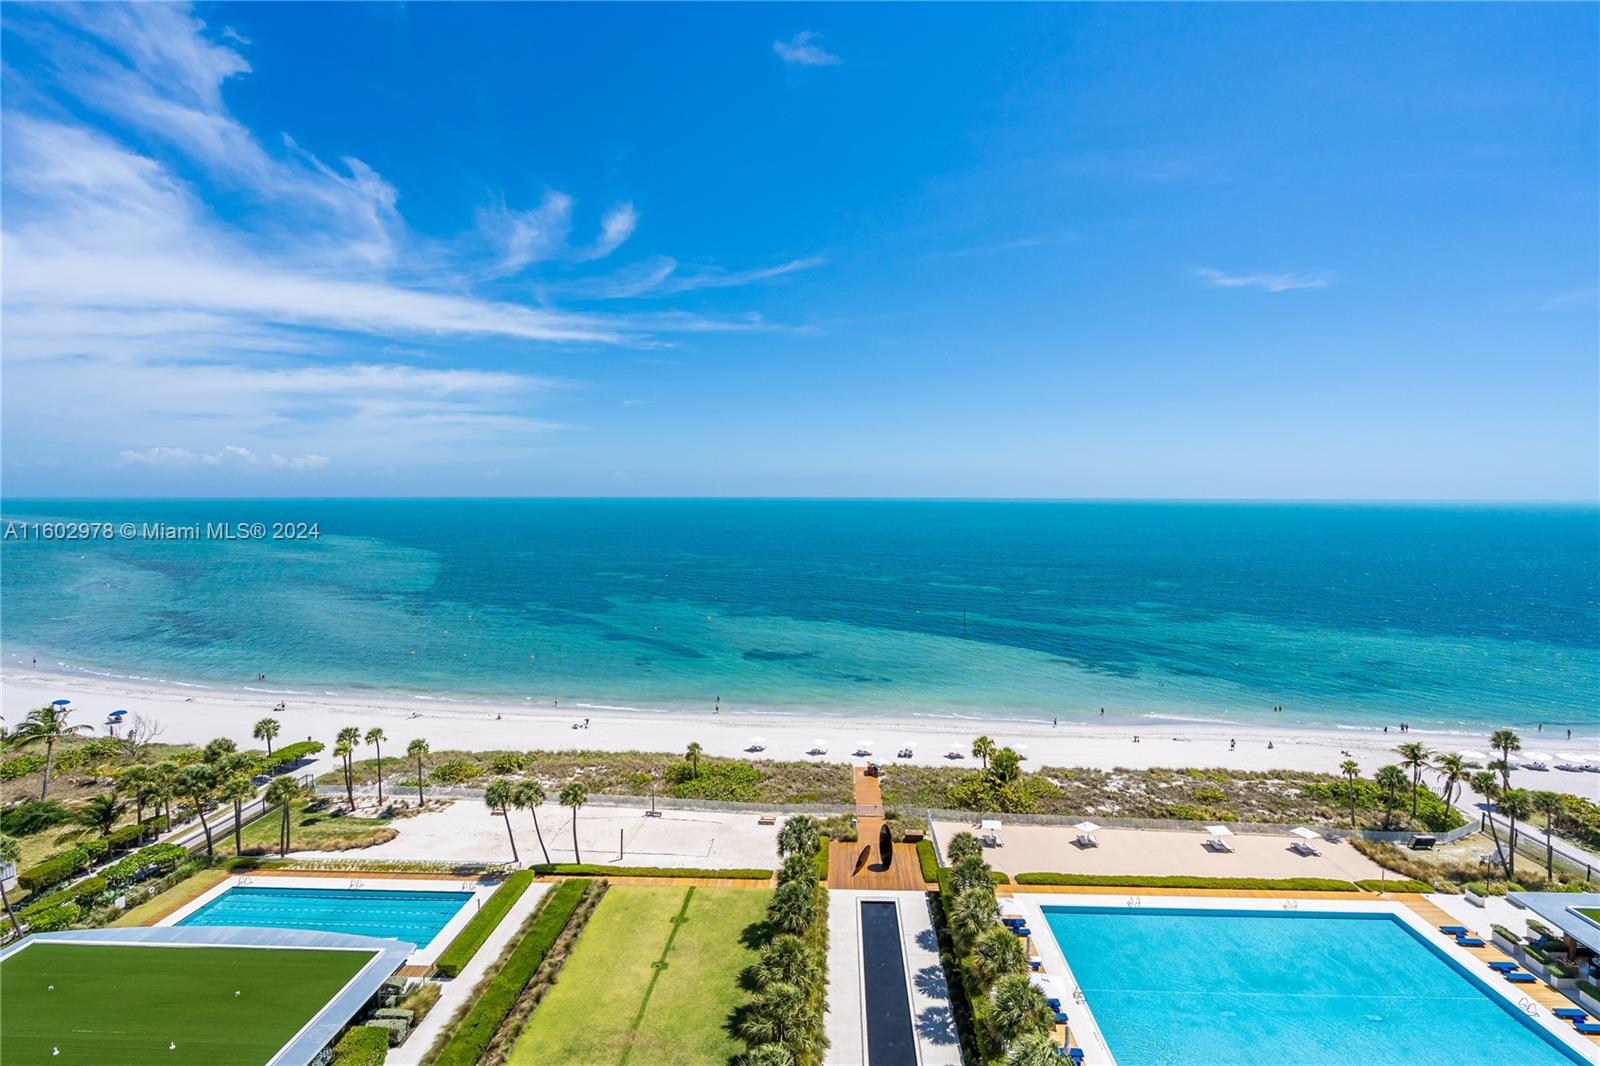 Gorgeous finely finished flow-through unit at the exclusive beachfront Oceana in Key Biscayne! Private elevator leads you into this spectacular 3B + Staff, 4.5 Baths unit. Floor-to-ceiling windows and expansive terraces throughout encompass beautiful direct East and West views. Features natural stone, oak wall panels and staggering finishes throughout. This luxurious modern style building offers a grand pool and exercise pool, al-fresco Beachfront Restaurant, Tennis court, state-of-the-art gym and spa with ocean views, kids play room, party & media rooms, 24-hour security and valet, beach and pool services, golf putting green and Sand Volleyball on it's 500 ft private beach.